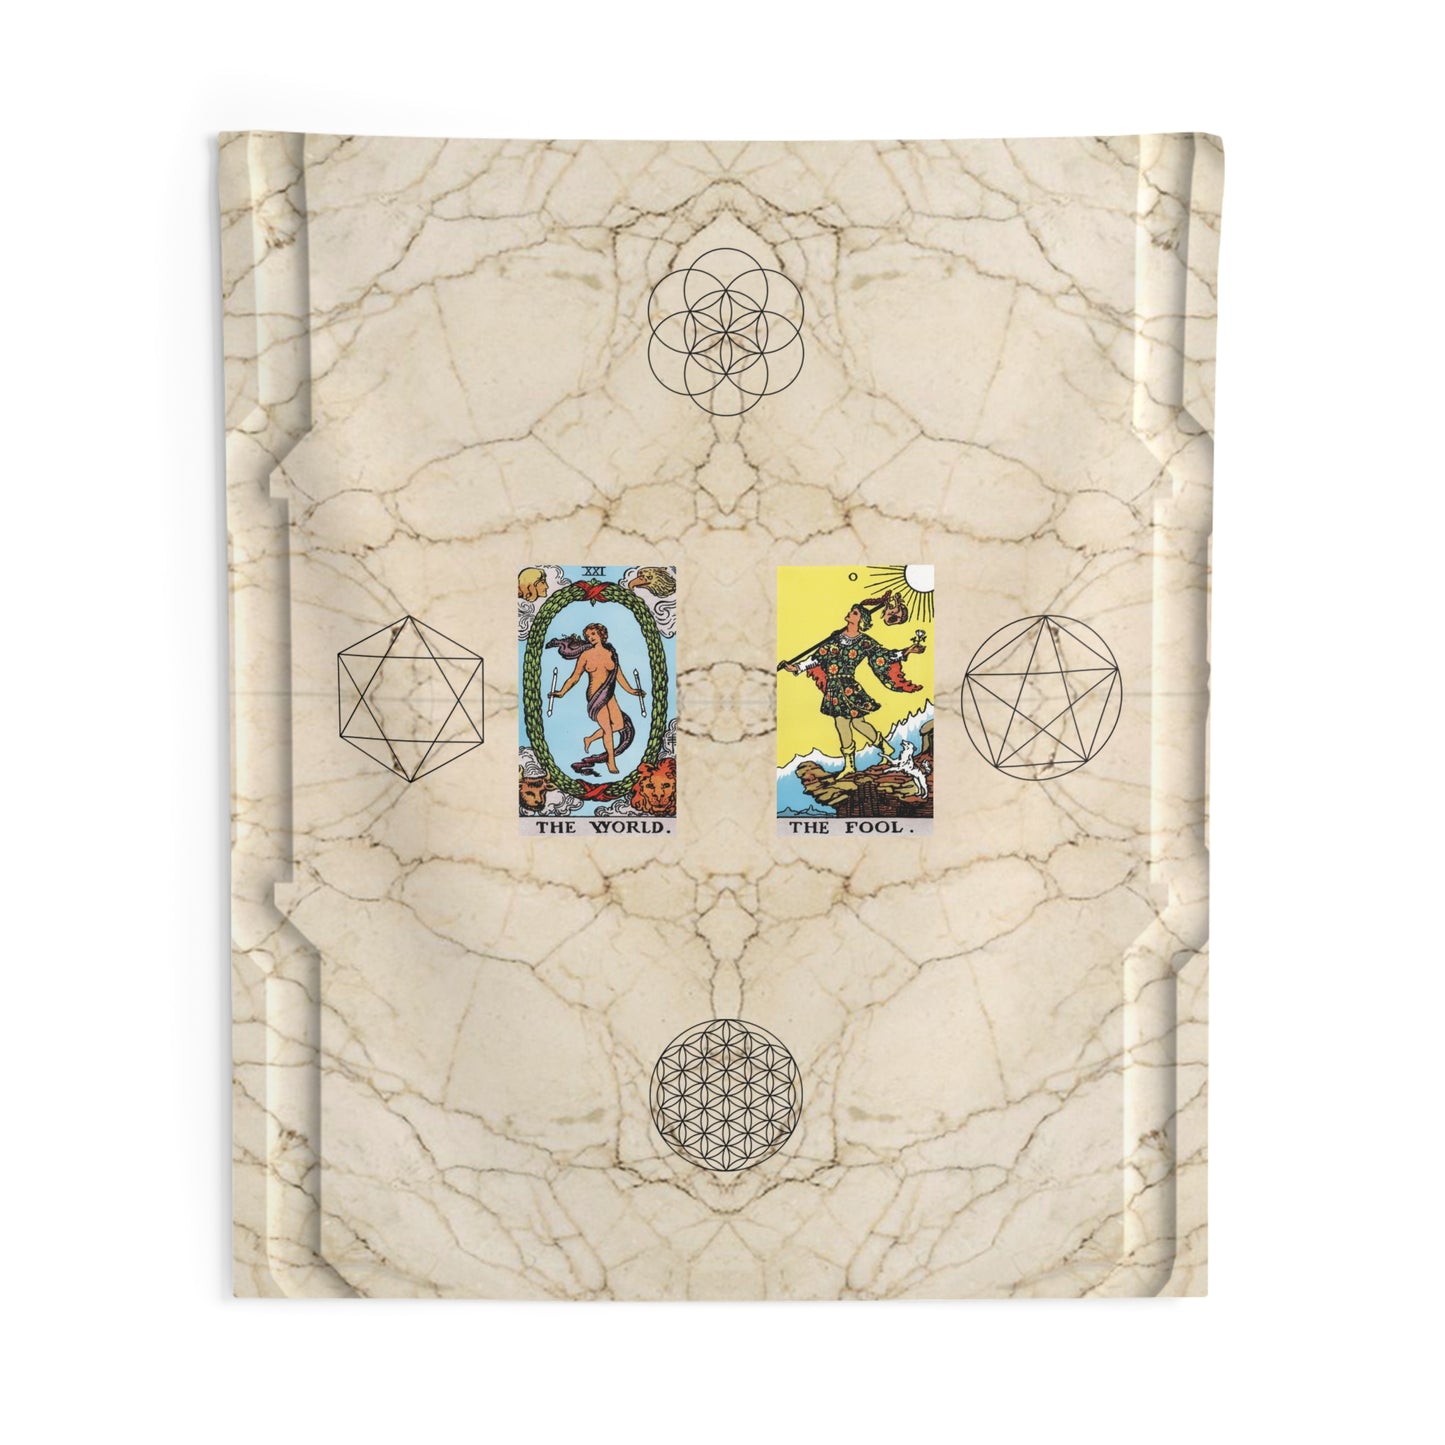 The World AND The Fool Tarot Cards Altar Cloth or Tapestry with Marble Background, Flower of Life and Seed of Life